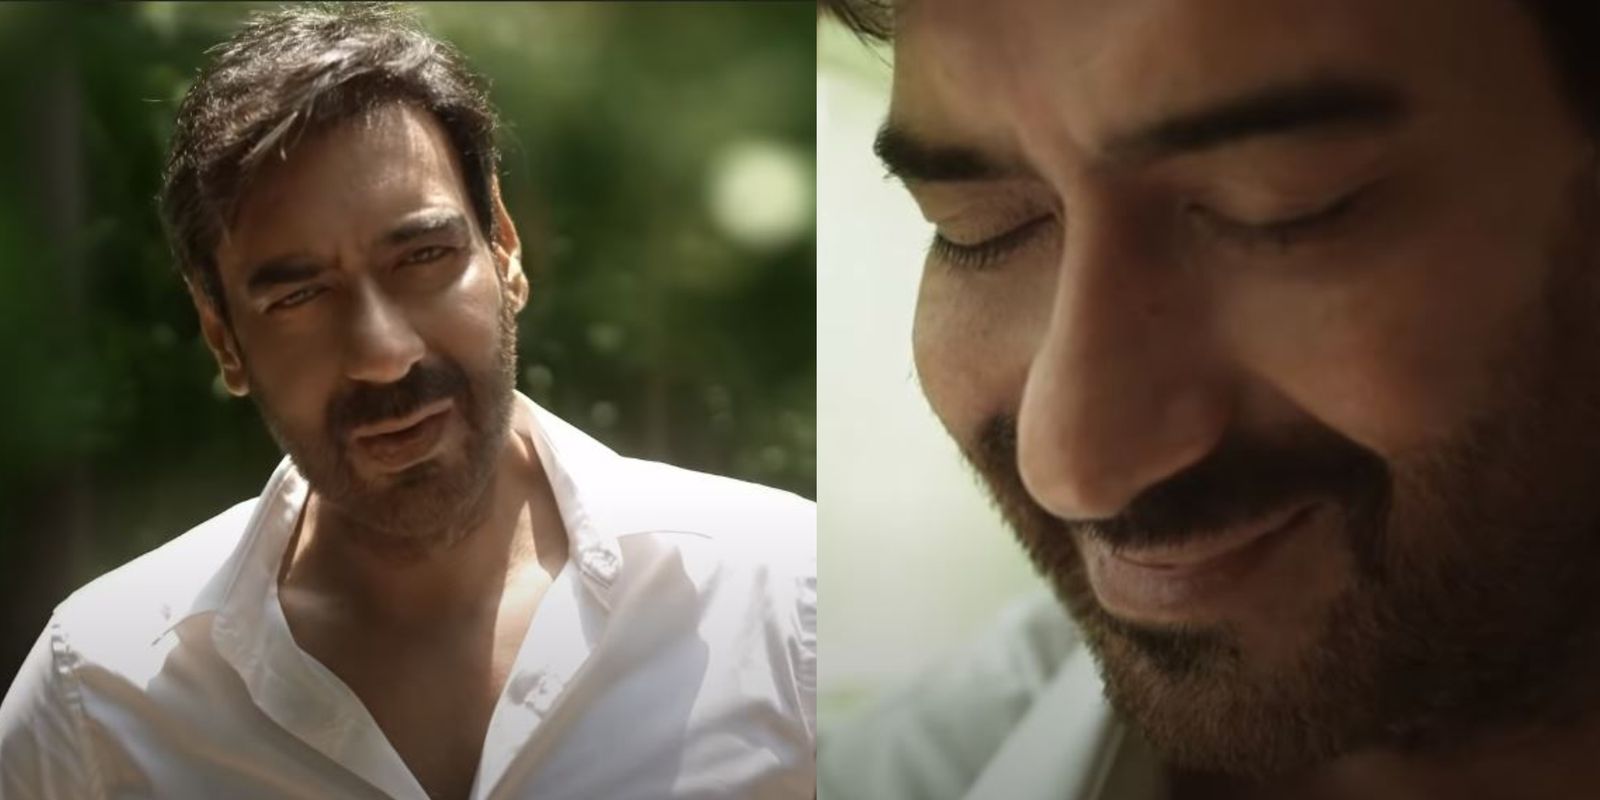 Thahar Ja: Ajay Devgn Releases Original Song Urging Everyone To Pause, For The Sake Of Loved Ones Amid Coronavirus Pandemic